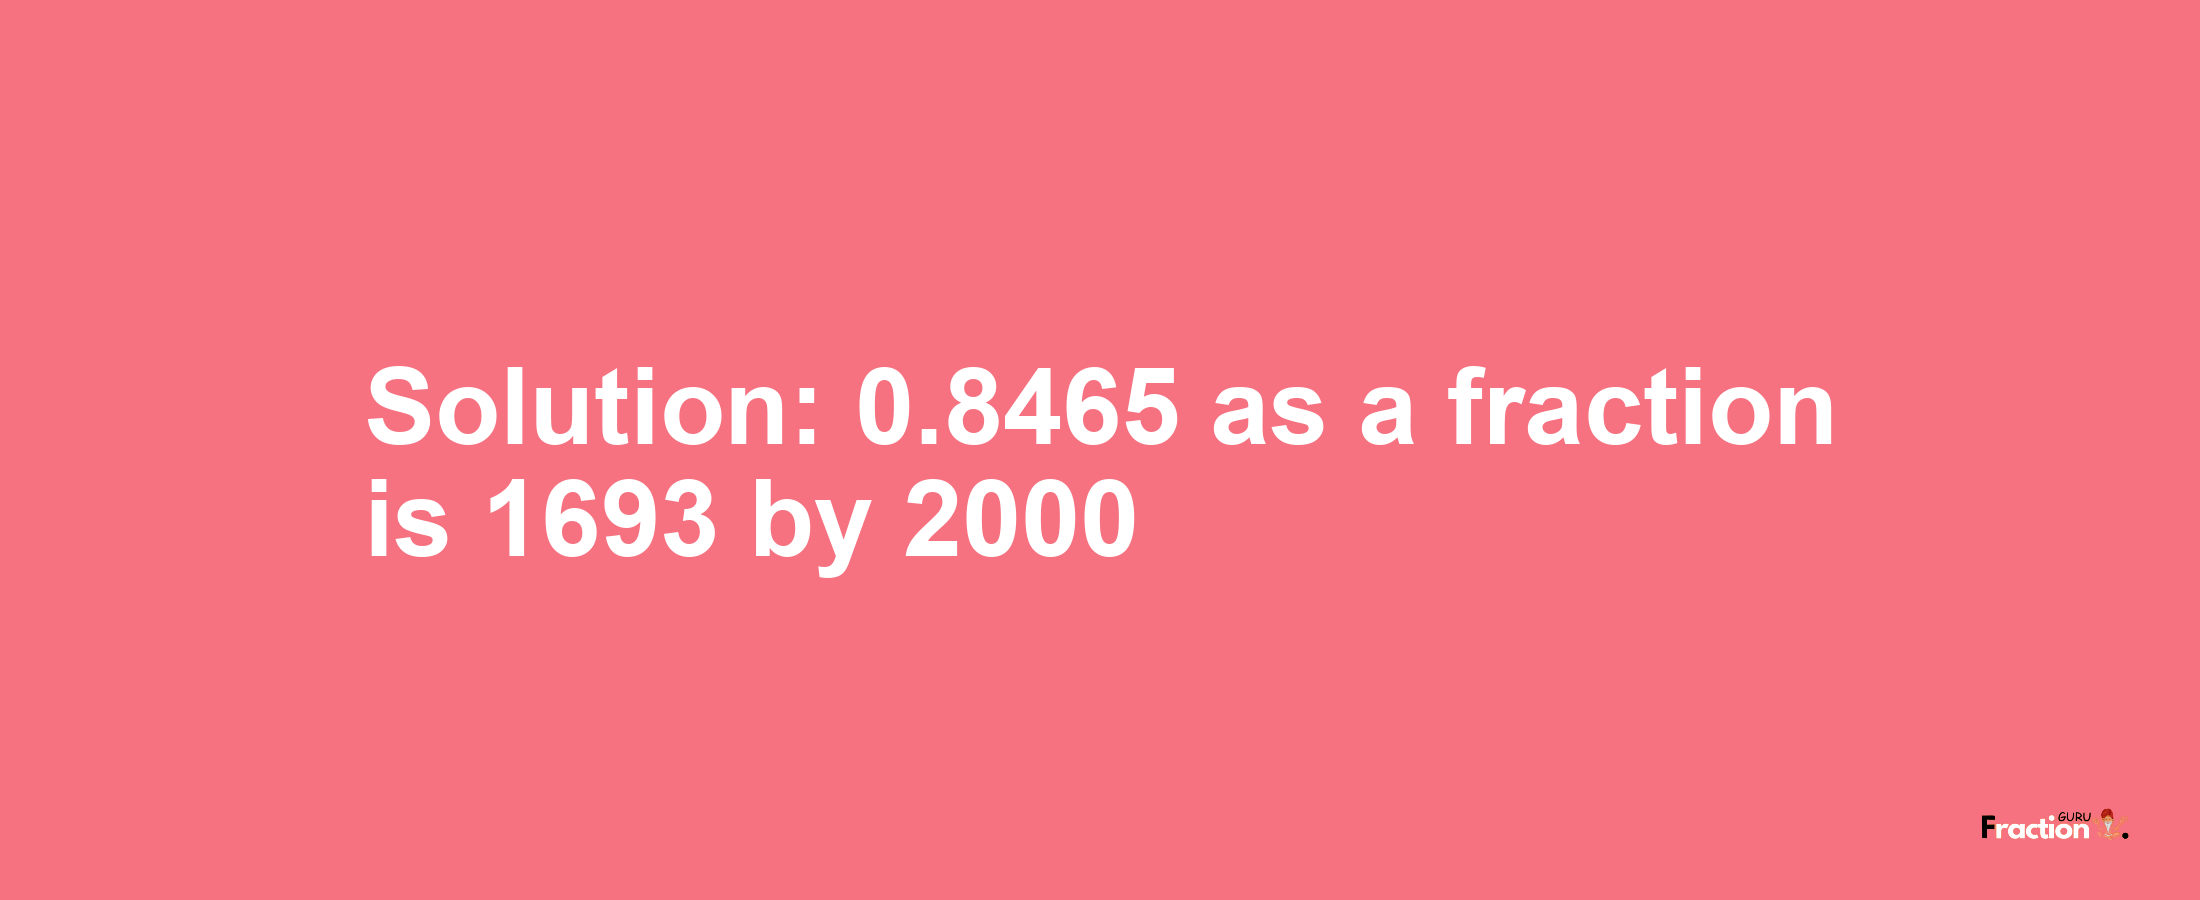 Solution:0.8465 as a fraction is 1693/2000